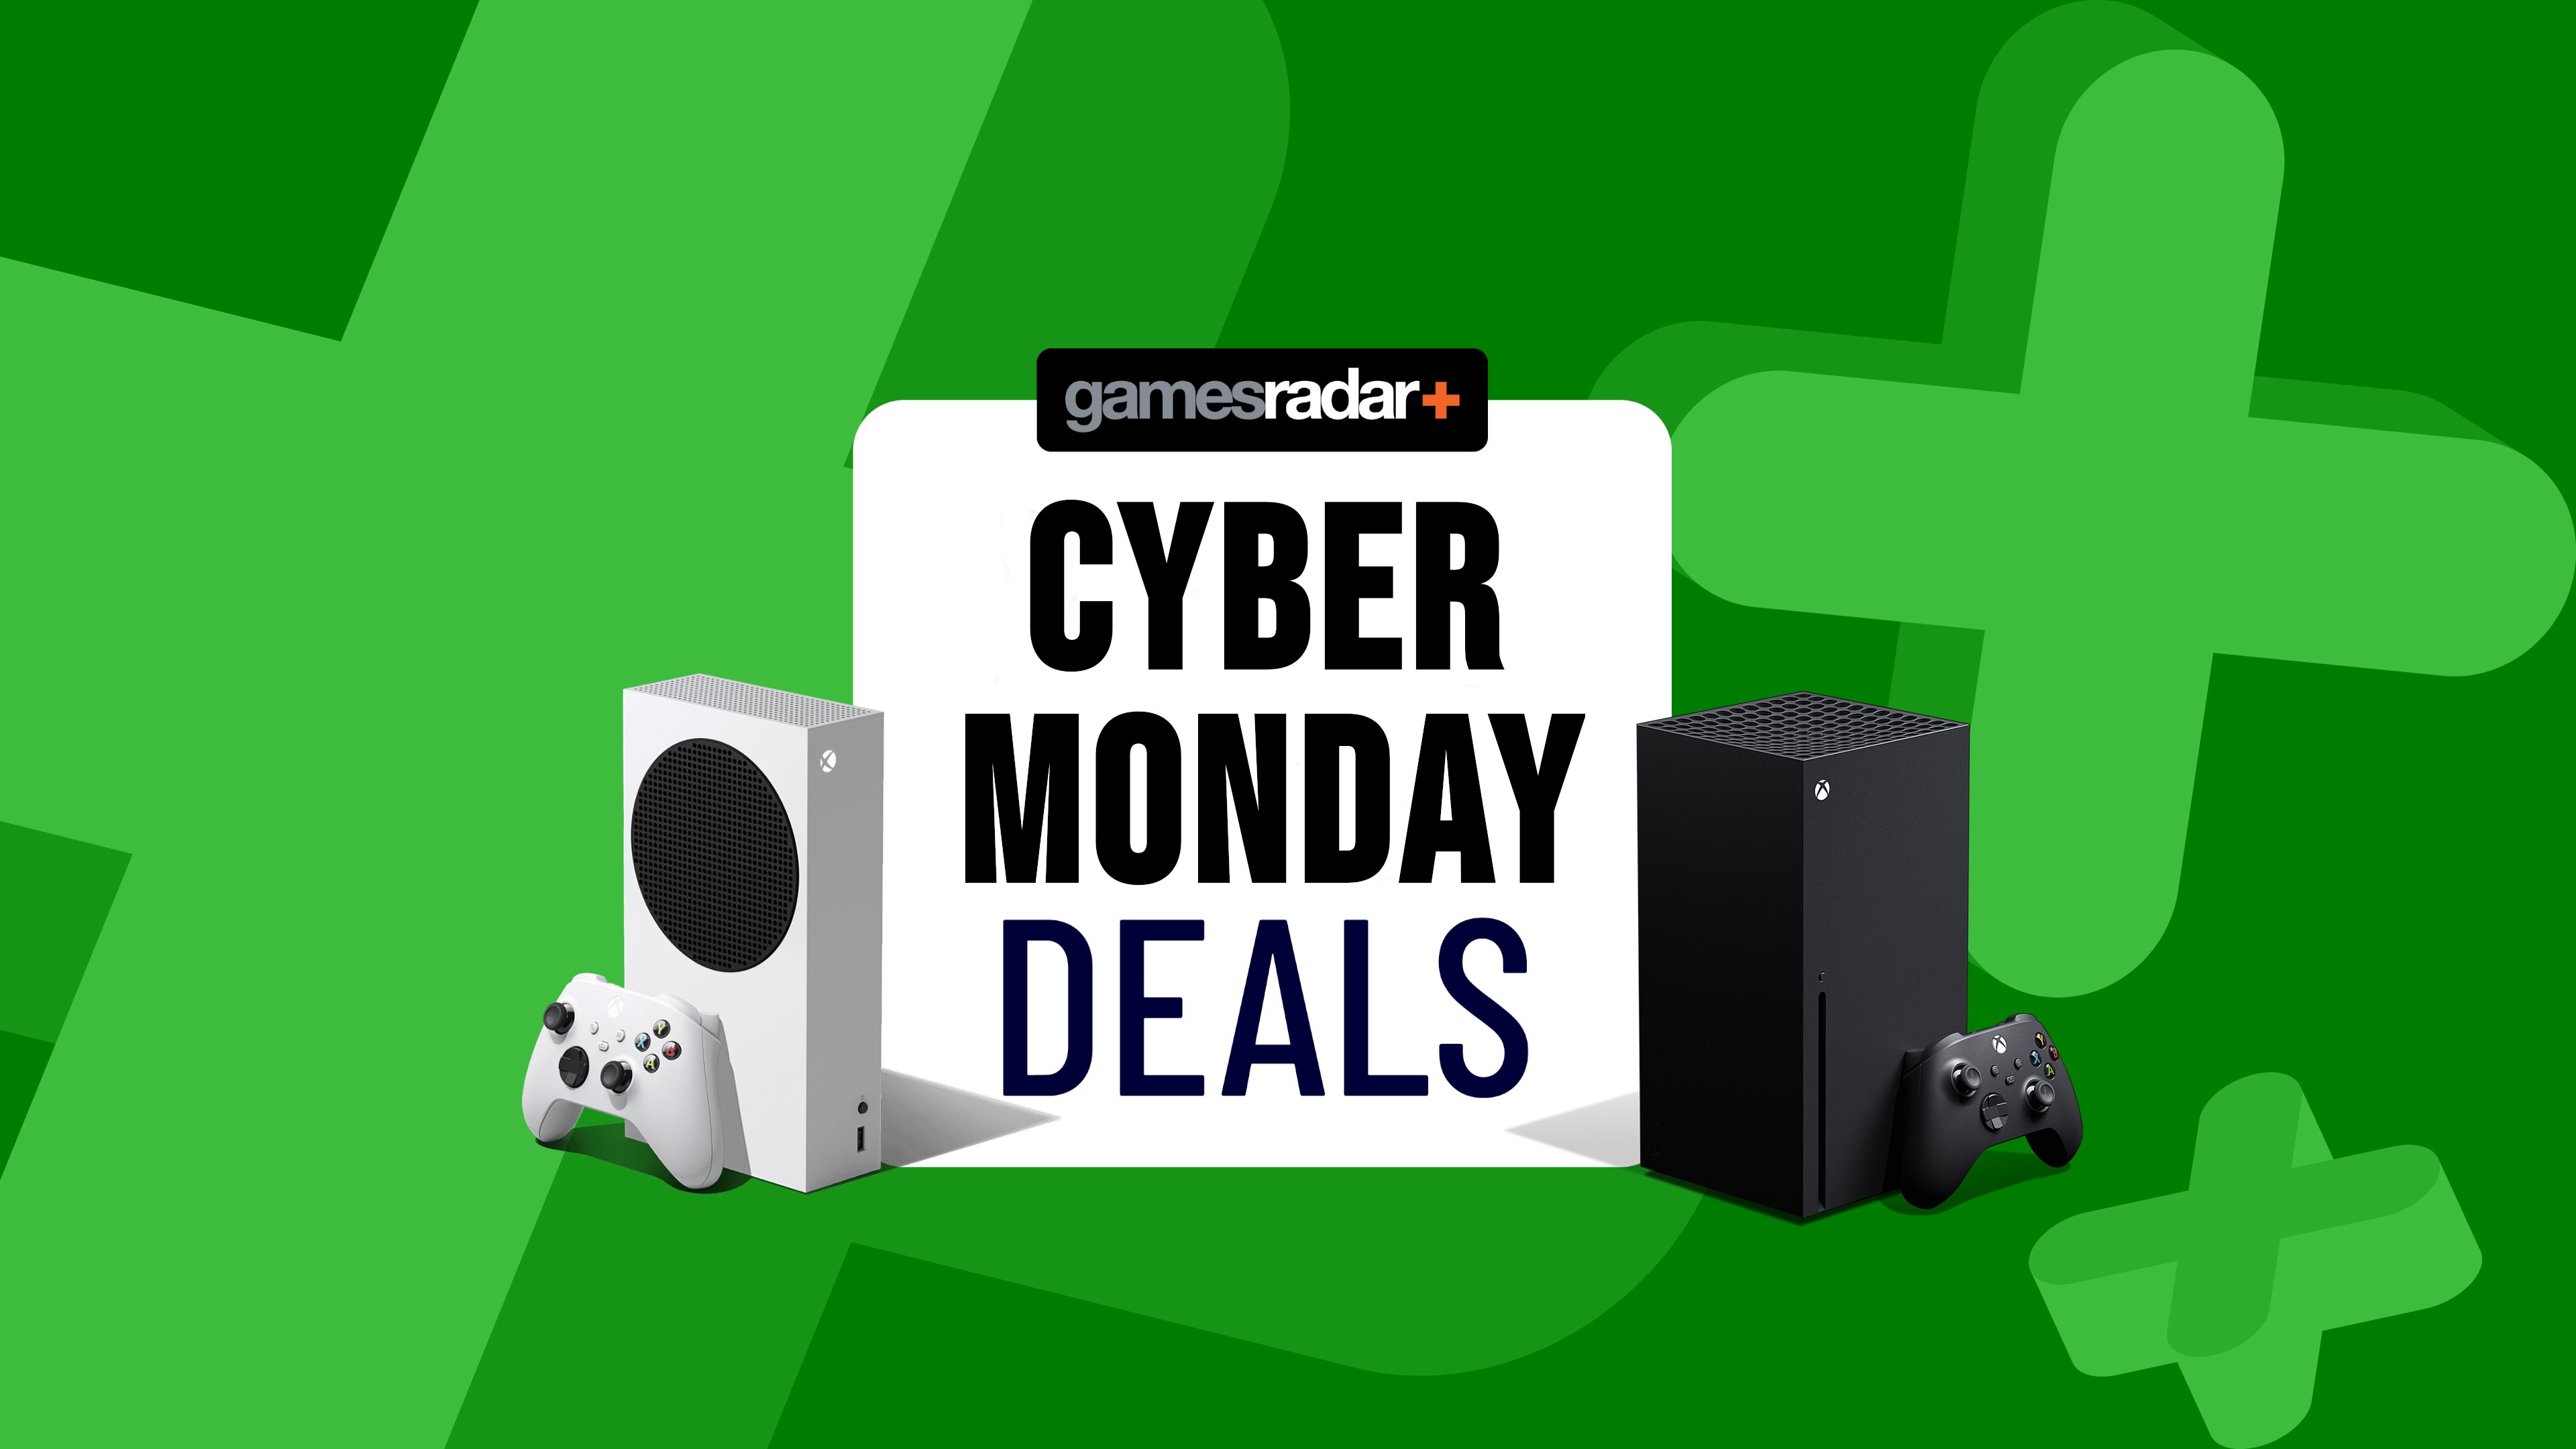 Cyber Monday Xbox deals live: The biggest savings now available